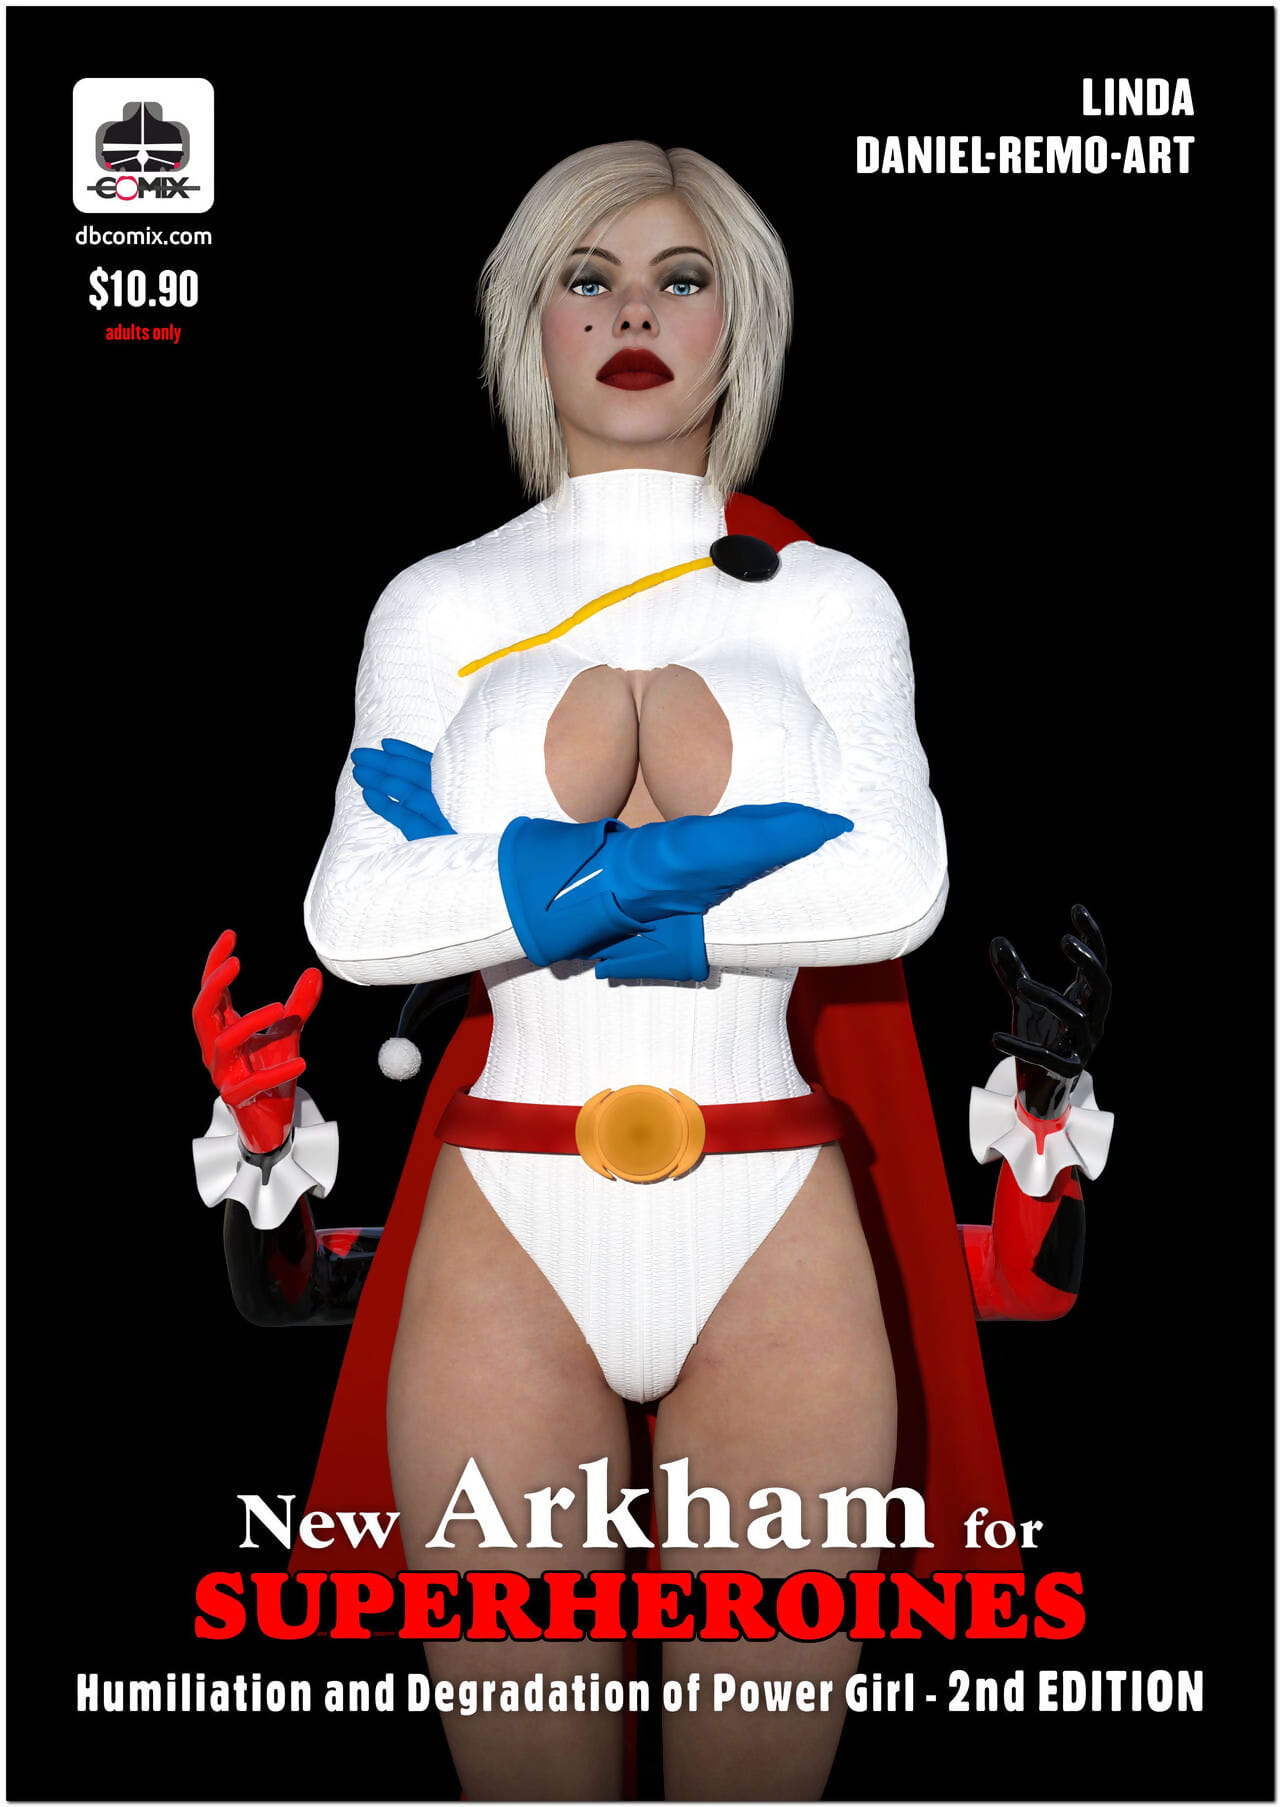 New Arkham For Superheroines 1 2nd Edition - Humiliation and Degradation of Power Girl page 1